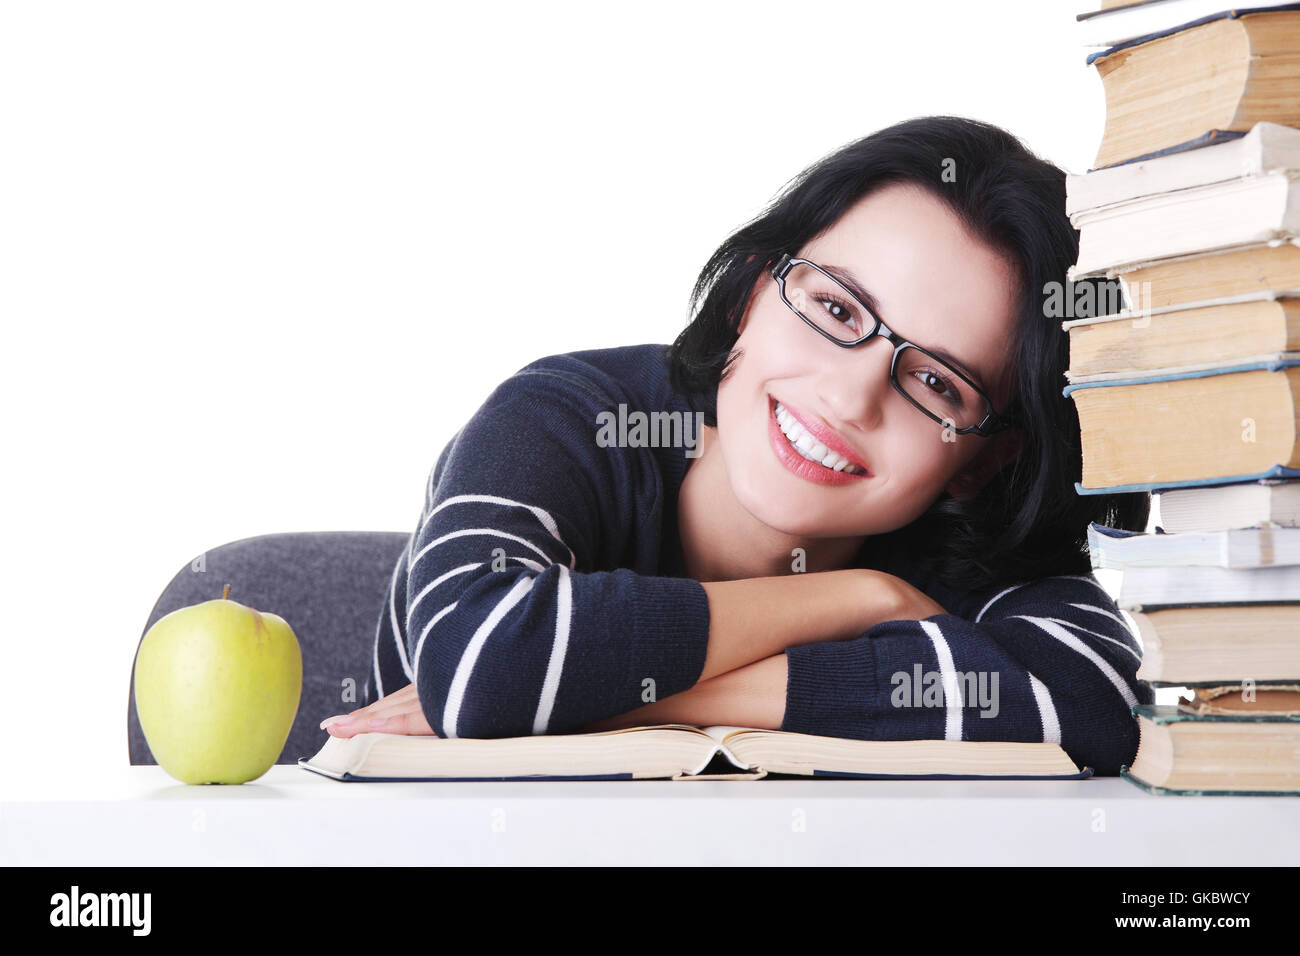 study humans human beings Stock Photo